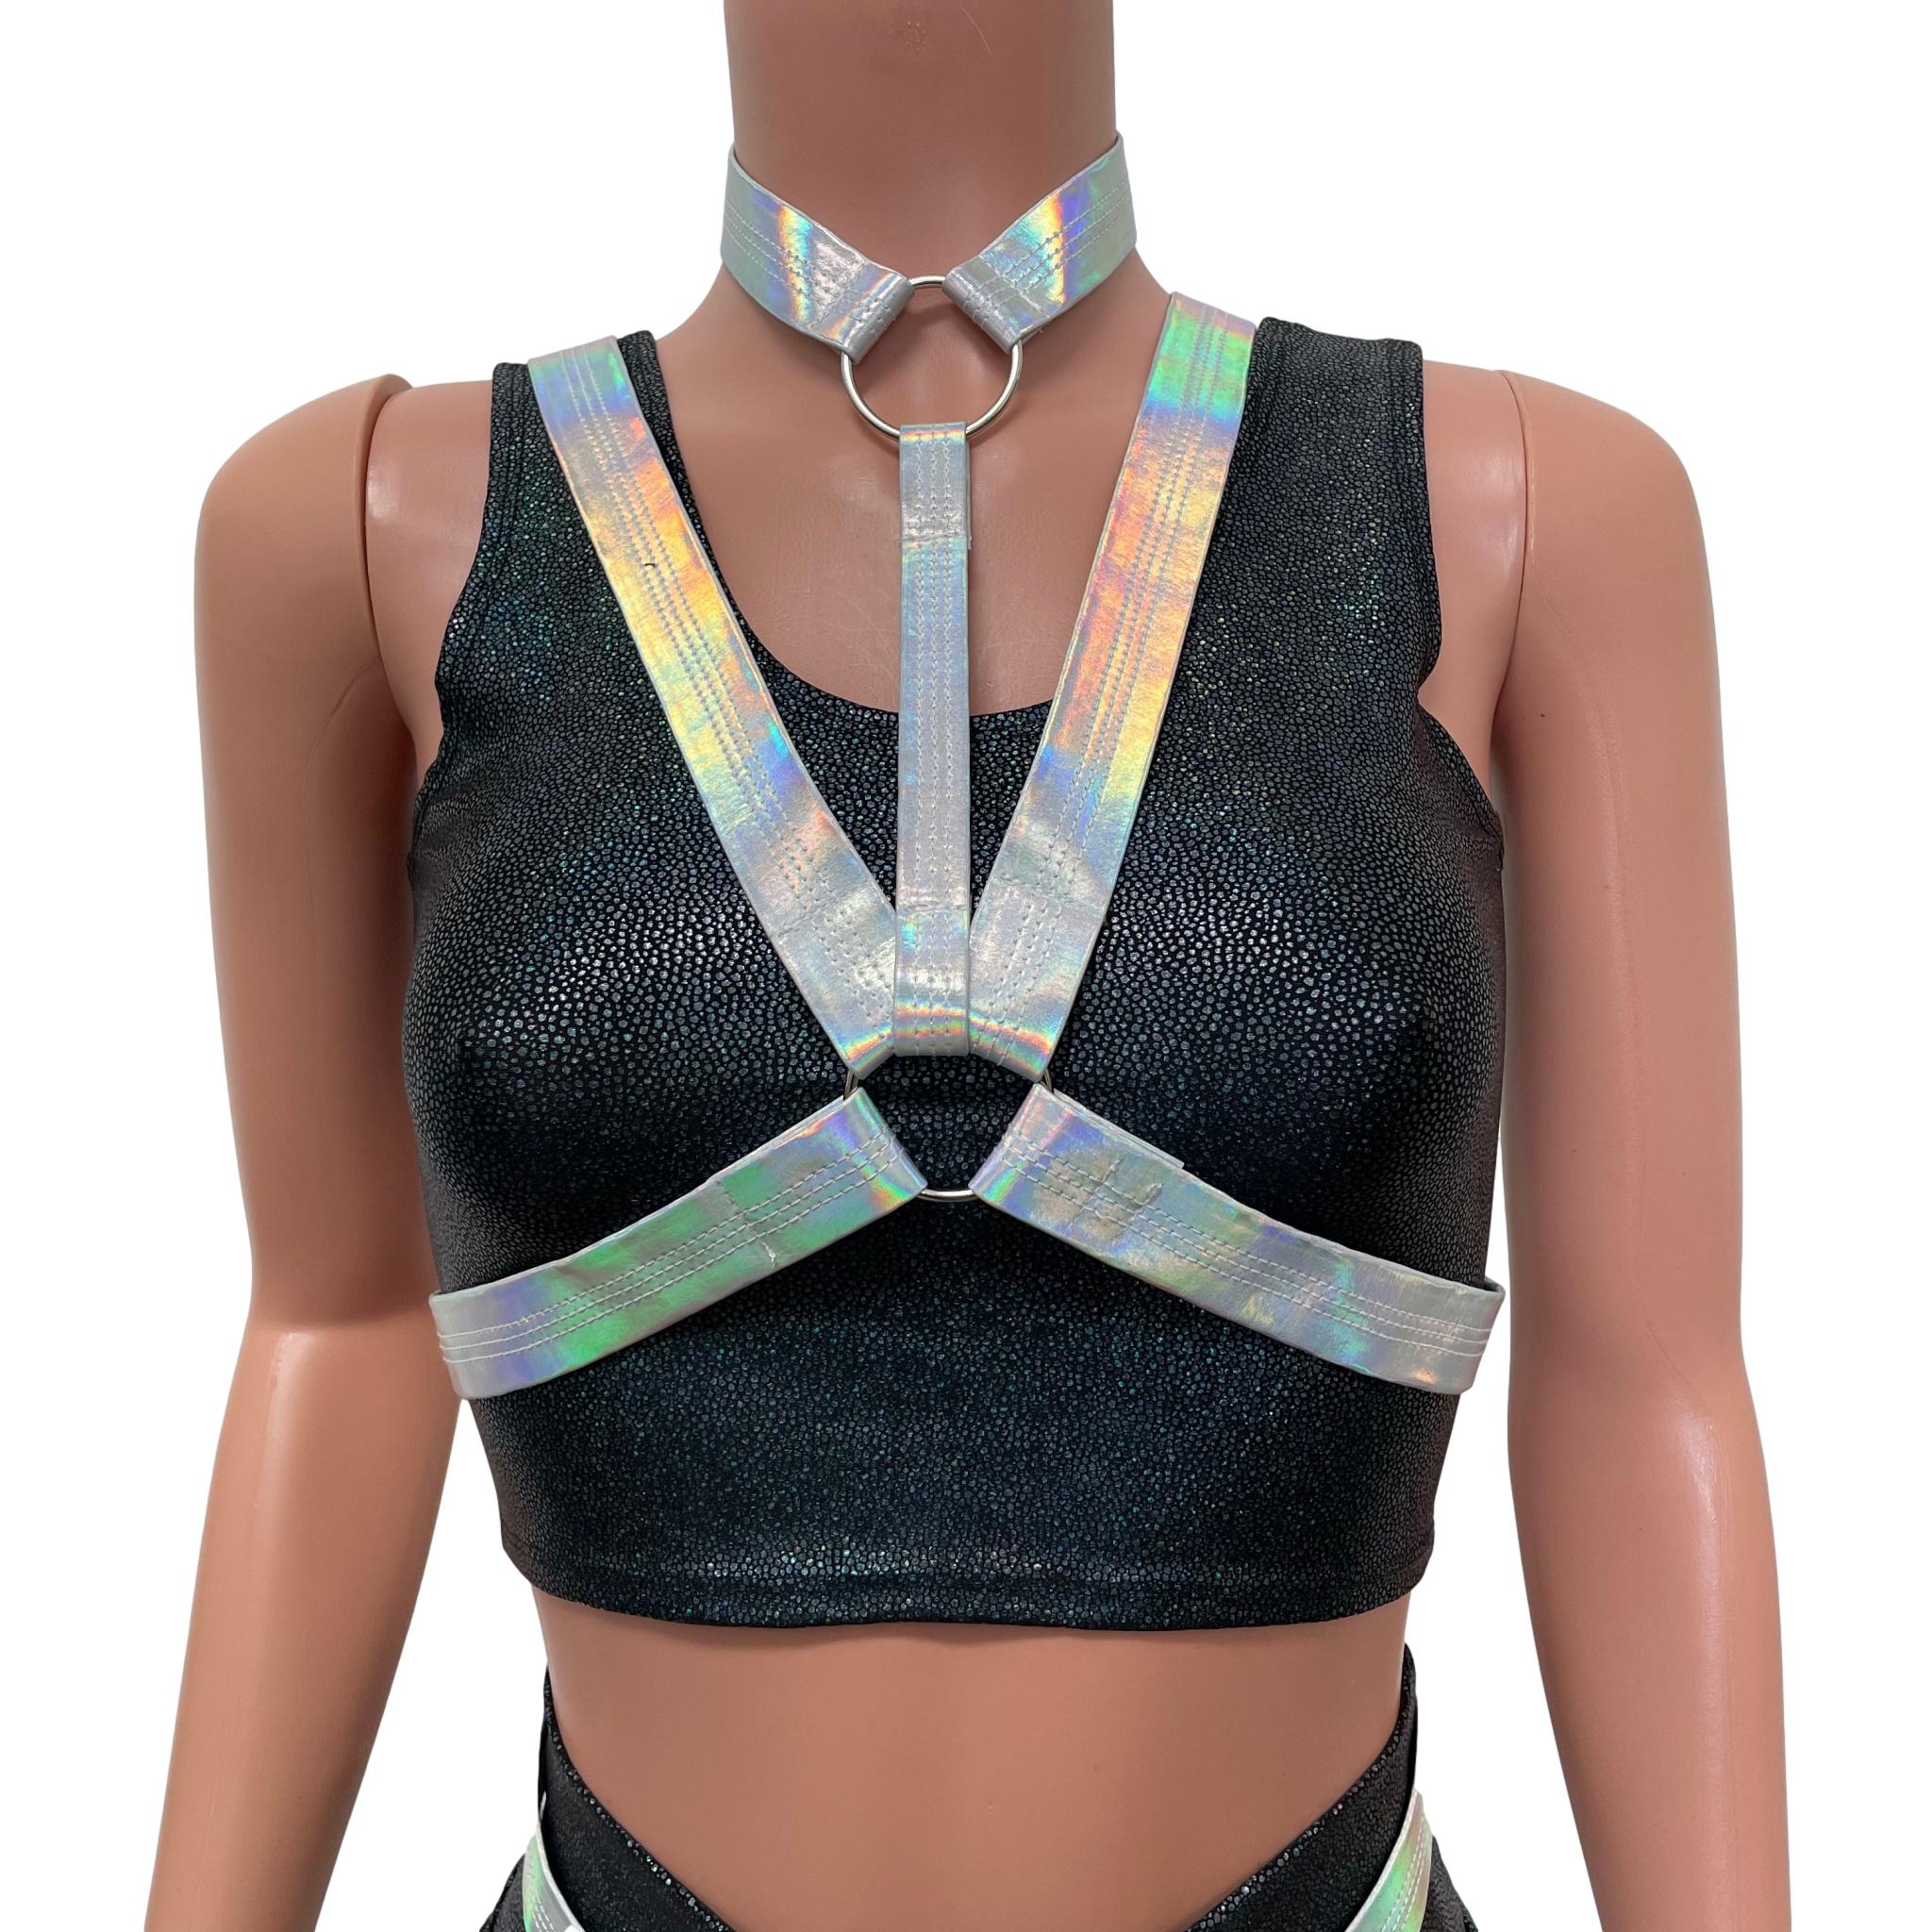 Cage Bra Harness Top in Opal Holographic